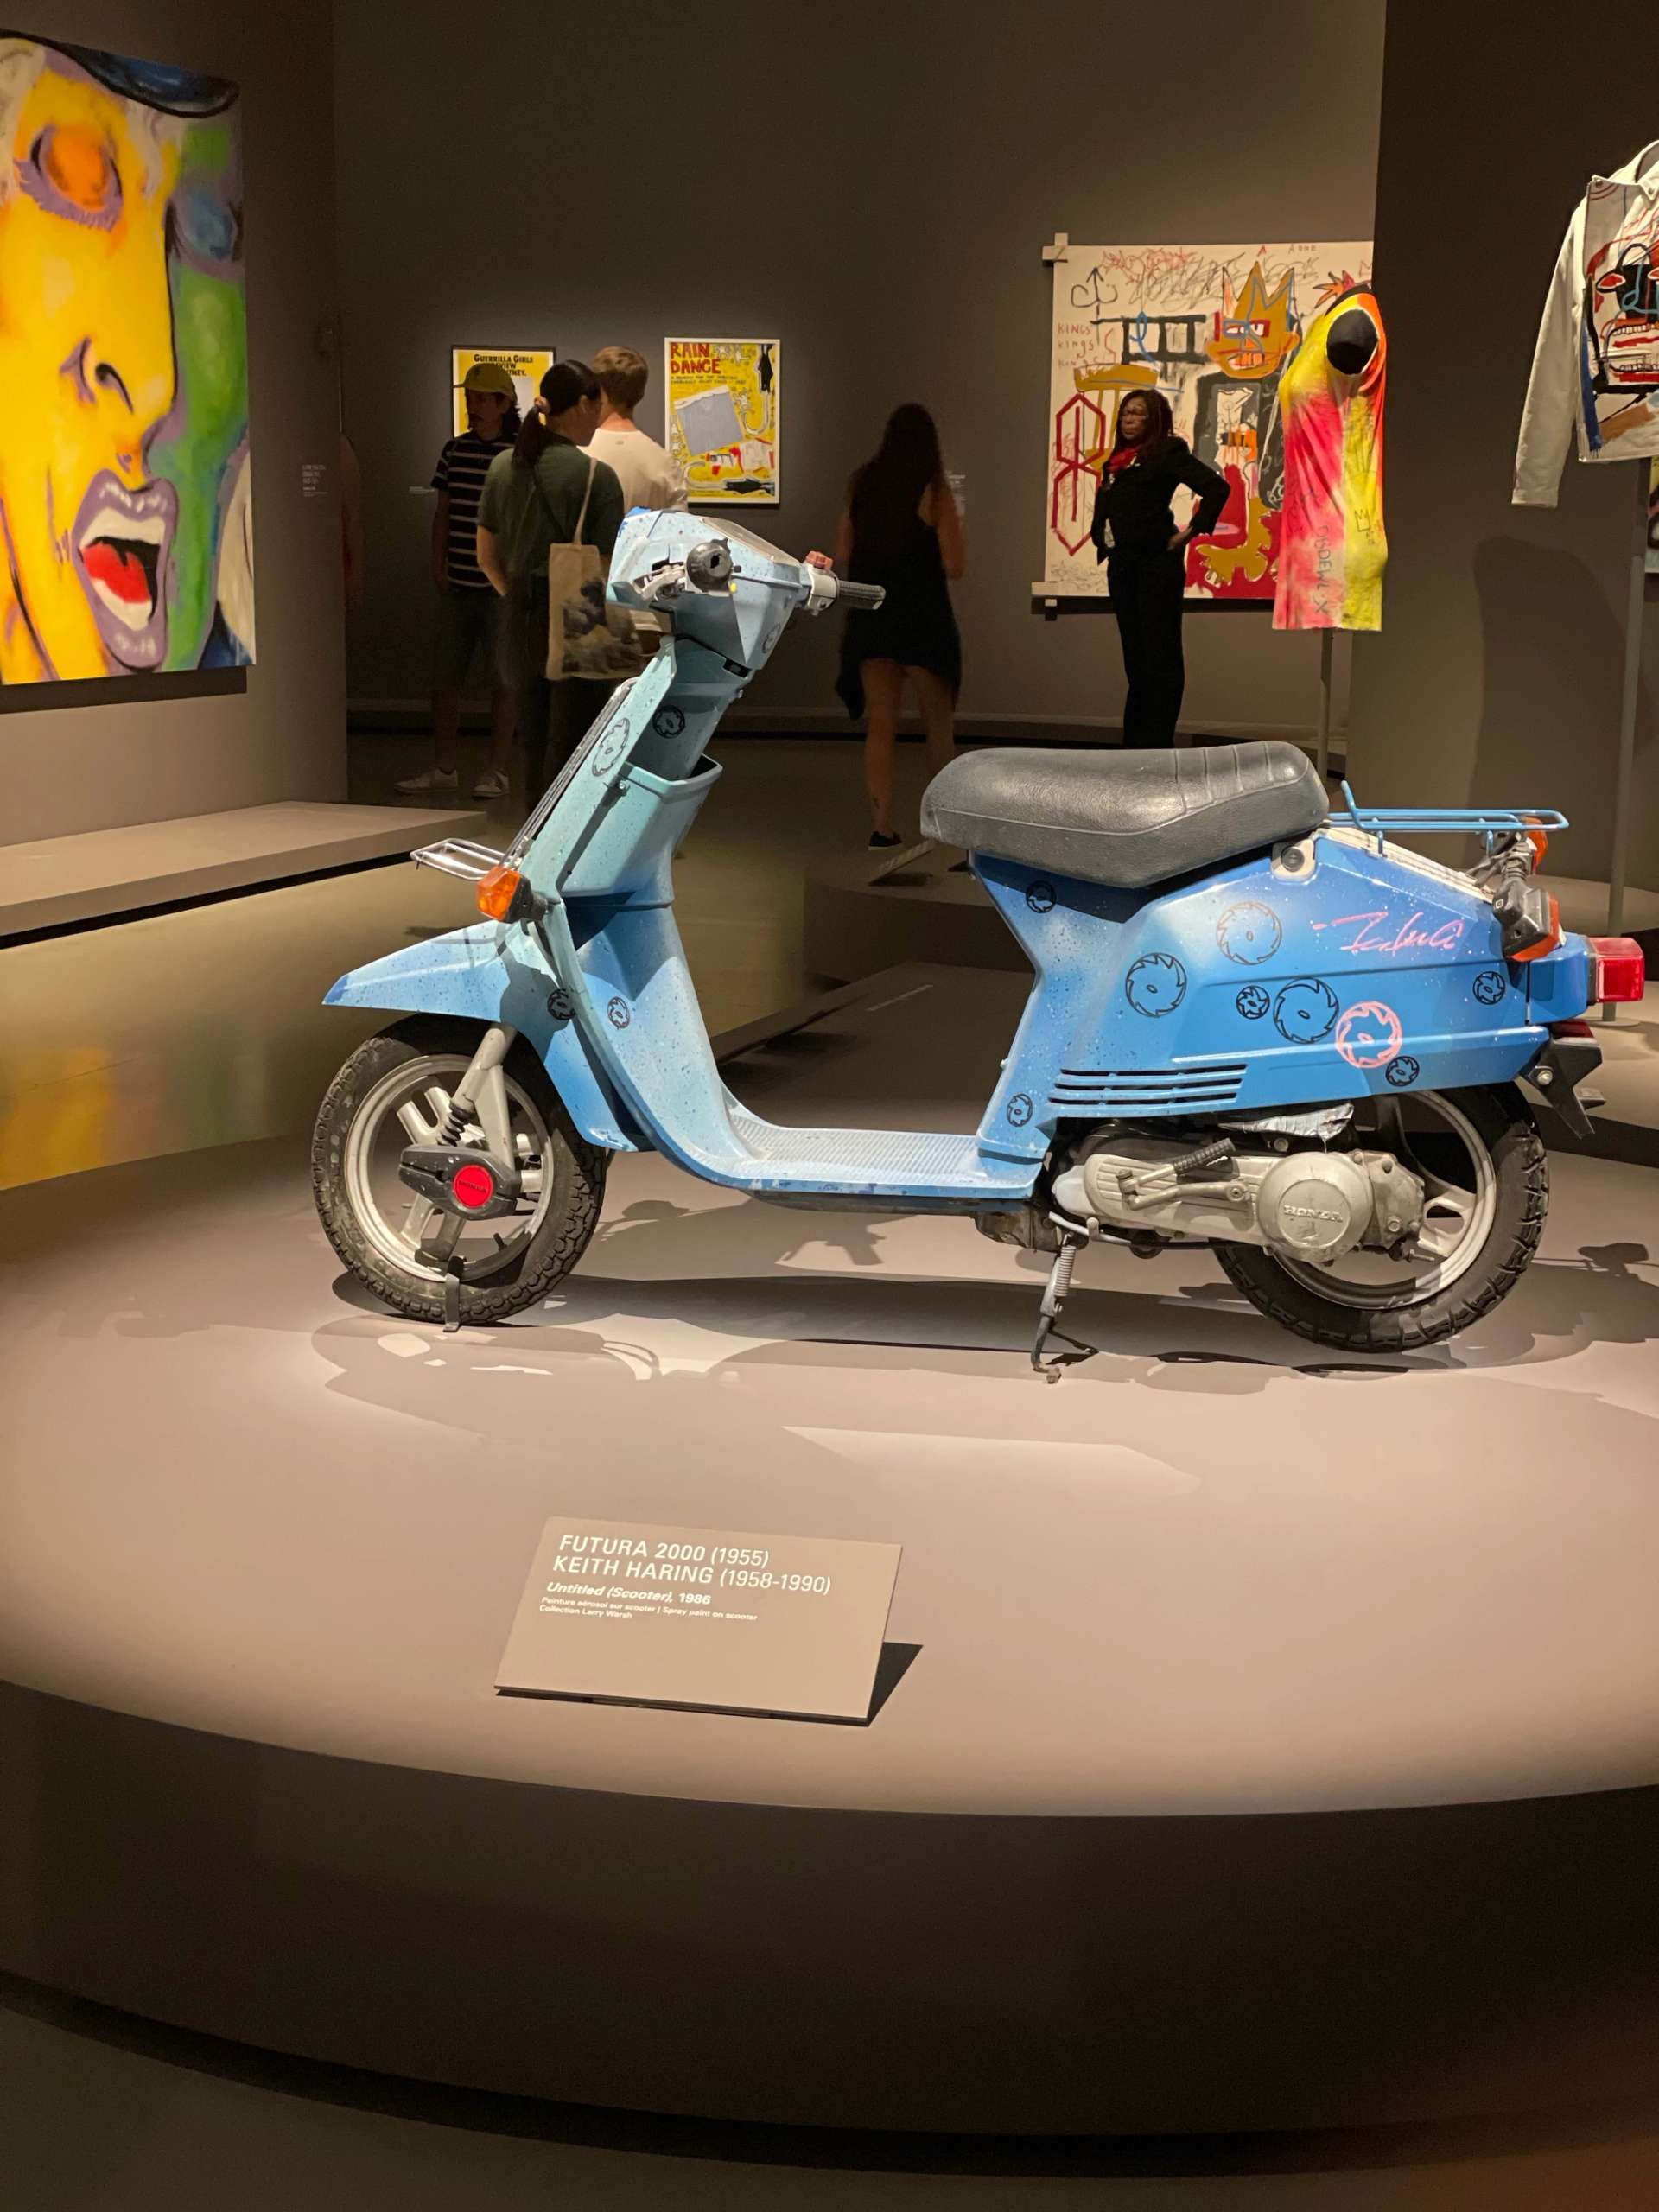 A blue motor scooter in the middle of an art exhibition